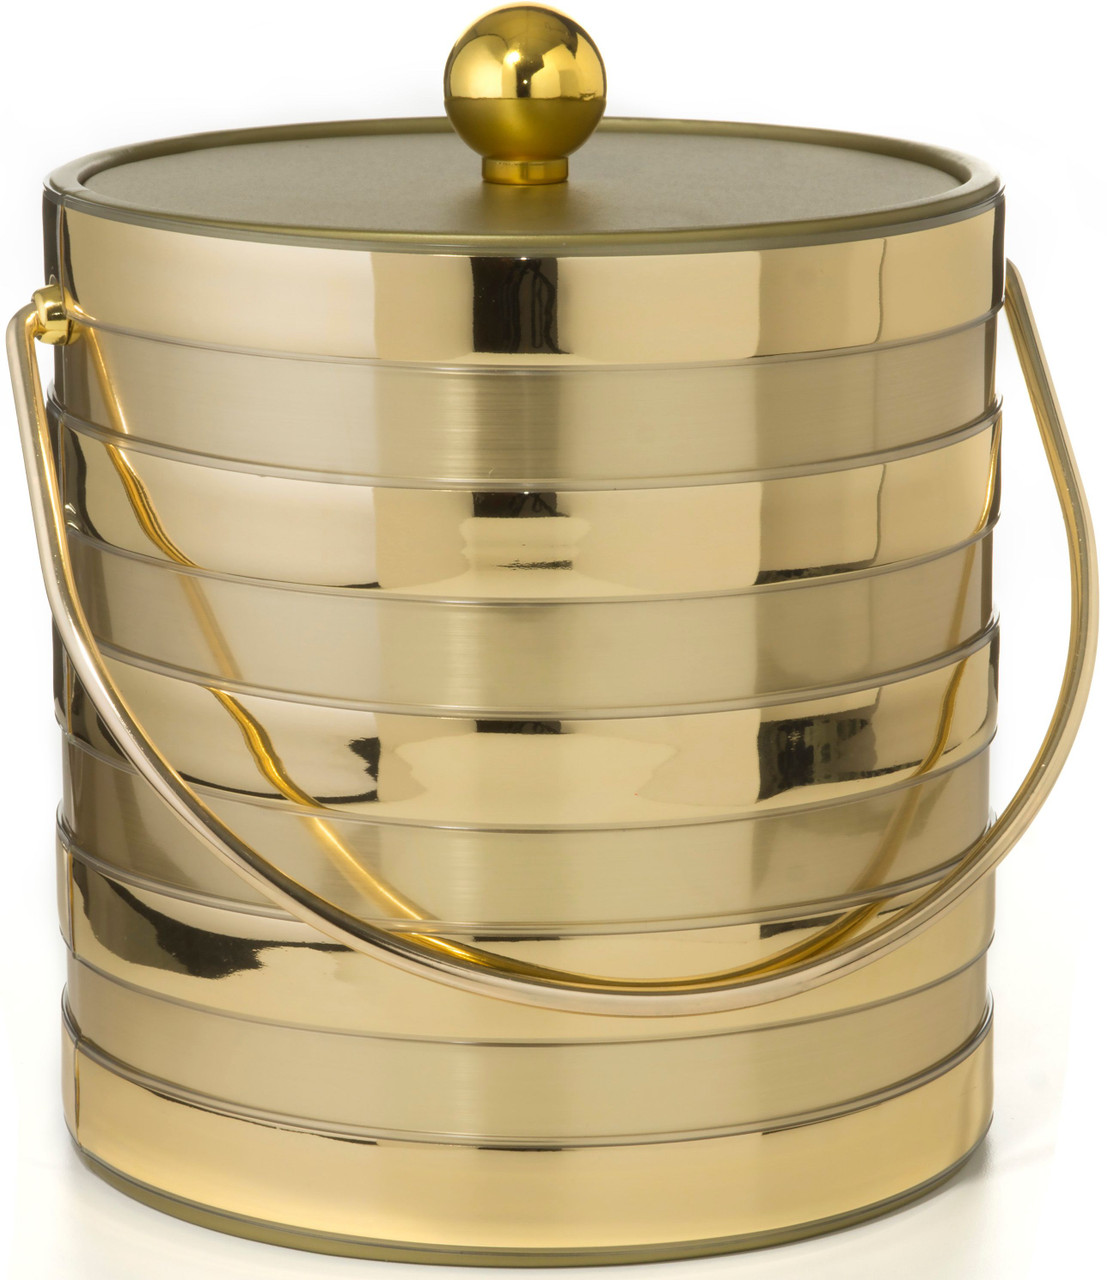 Metallic Deco Collection Hand Made In USA Matte/Shiny Brushed Gold Stripes Double Walled 3-Quart Insulated Ice Bucket With Ice Tongs 